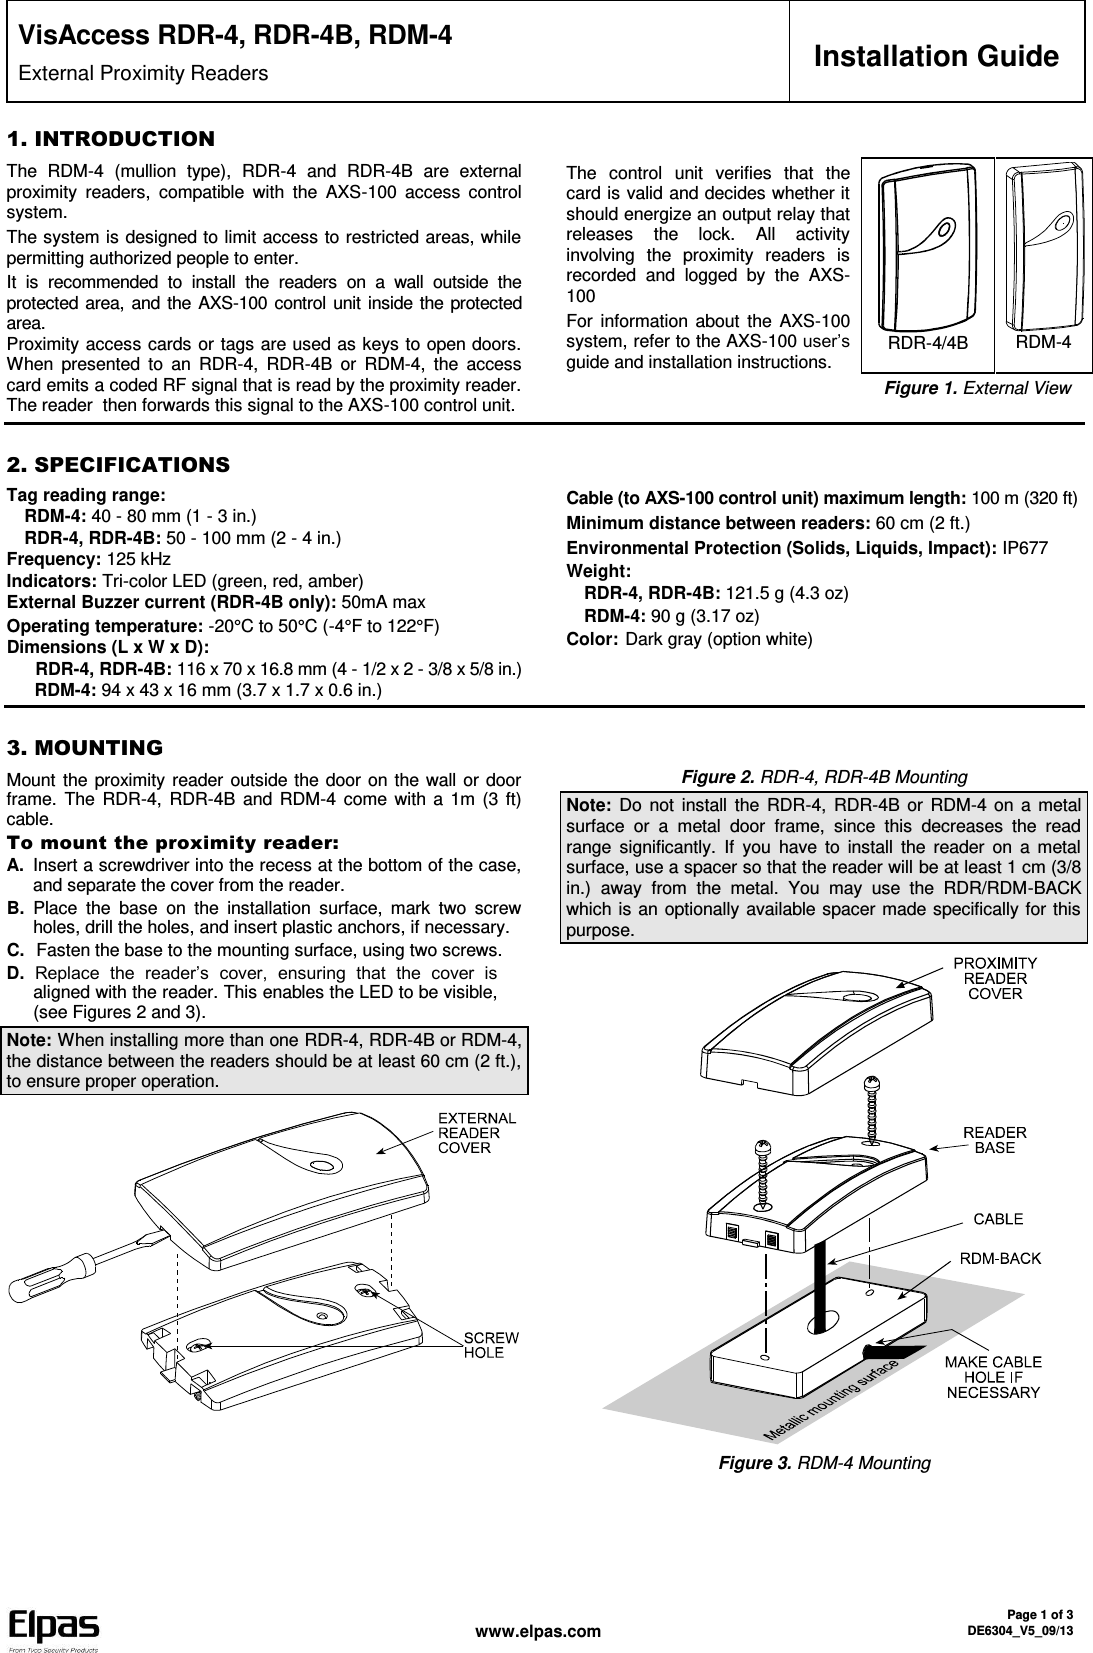  www.elpas.com Page 1 of 3 DE6304_V5_09/13   VisAccess RDR-4, RDR-4B, RDM-4 External Proximity Readers  Installation Guide 1. INTRODUCTION The  RDM-4  (mullion  type),  RDR-4  and  RDR-4B  are  external proximity  readers,  compatible  with  the  AXS-100  access  control system.  The system is designed to limit access to restricted areas, while permitting authorized people to enter.  It  is  recommended  to  install  the  readers  on  a  wall  outside  the protected area, and the AXS-100 control unit inside the protected area. Proximity access cards or tags are used as keys to open doors. When  presented  to  an  RDR-4,  RDR-4B  or  RDM-4,  the  access card emits a coded RF signal that is read by the proximity reader. The reader  then forwards this signal to the AXS-100 control unit.  The  control  unit  verifies  that  the card is valid and decides whether it should energize an output relay that releases  the  lock.  All  activity involving  the  proximity  readers  is recorded  and  logged  by  the  AXS-100 For information  about  the AXS-100 system, refer to the AXS-100 user’s guide and installation instructions.  RDR-4/4B  RDM-4  Figure 1. External View   2. SPECIFICATIONS Tag reading range:   RDM-4: 40 - 80 mm (1 - 3 in.)  RDR-4, RDR-4B: 50 - 100 mm (2 - 4 in.) Frequency: 125 kHz Indicators: Tri-color LED (green, red, amber) External Buzzer current (RDR-4B only): 50mA max Operating temperature: -20°C to 50°C (-4°F to 122°F)  Dimensions (L x W x D):  RDR-4, RDR-4B: 116 x 70 x 16.8 mm (4 - 1/2 x 2 - 3/8 x 5/8 in.)   RDM-4: 94 x 43 x 16 mm (3.7 x 1.7 x 0.6 in.) Cable (to AXS-100 control unit) maximum length: 100 m (320 ft) Minimum distance between readers: 60 cm (2 ft.) Environmental Protection (Solids, Liquids, Impact): IP677 Weight:  RDR-4, RDR-4B: 121.5 g (4.3 oz)  RDM-4: 90 g (3.17 oz) Color: Dark gray (option white)    3. MOUNTING Mount the proximity reader outside the door on the wall or door frame. The  RDR-4, RDR-4B  and  RDM-4 come  with  a 1m (3 ft) cable. To mount the proximity reader: A.  Insert a screwdriver into the recess at the bottom of the case, and separate the cover from the reader. B.  Place  the  base  on  the  installation  surface,  mark  two  screw holes, drill the holes, and insert plastic anchors, if necessary. C.   Fasten the base to the mounting surface, using two screws. D. Replace  the  reader’s  cover,  ensuring  that  the  cover  is aligned with the reader. This enables the LED to be visible, (see Figures 2 and 3). Note: When installing more than one RDR-4, RDR-4B or RDM-4, the distance between the readers should be at least 60 cm (2 ft.), to ensure proper operation. Figure 2. RDR-4, RDR-4B Mounting Note: Do  not install  the RDR-4,  RDR-4B or  RDM-4 on a metal surface  or  a  metal  door  frame,  since  this  decreases  the  read range  significantly.  If  you  have  to  install  the  reader  on  a  metal surface, use a spacer so that the reader will be at least 1 cm (3/8 in.)  away  from  the  metal.  You  may  use  the  RDR/RDM-BACK which is an optionally available spacer made specifically for this purpose.  Figure 3. RDM-4 Mounting 